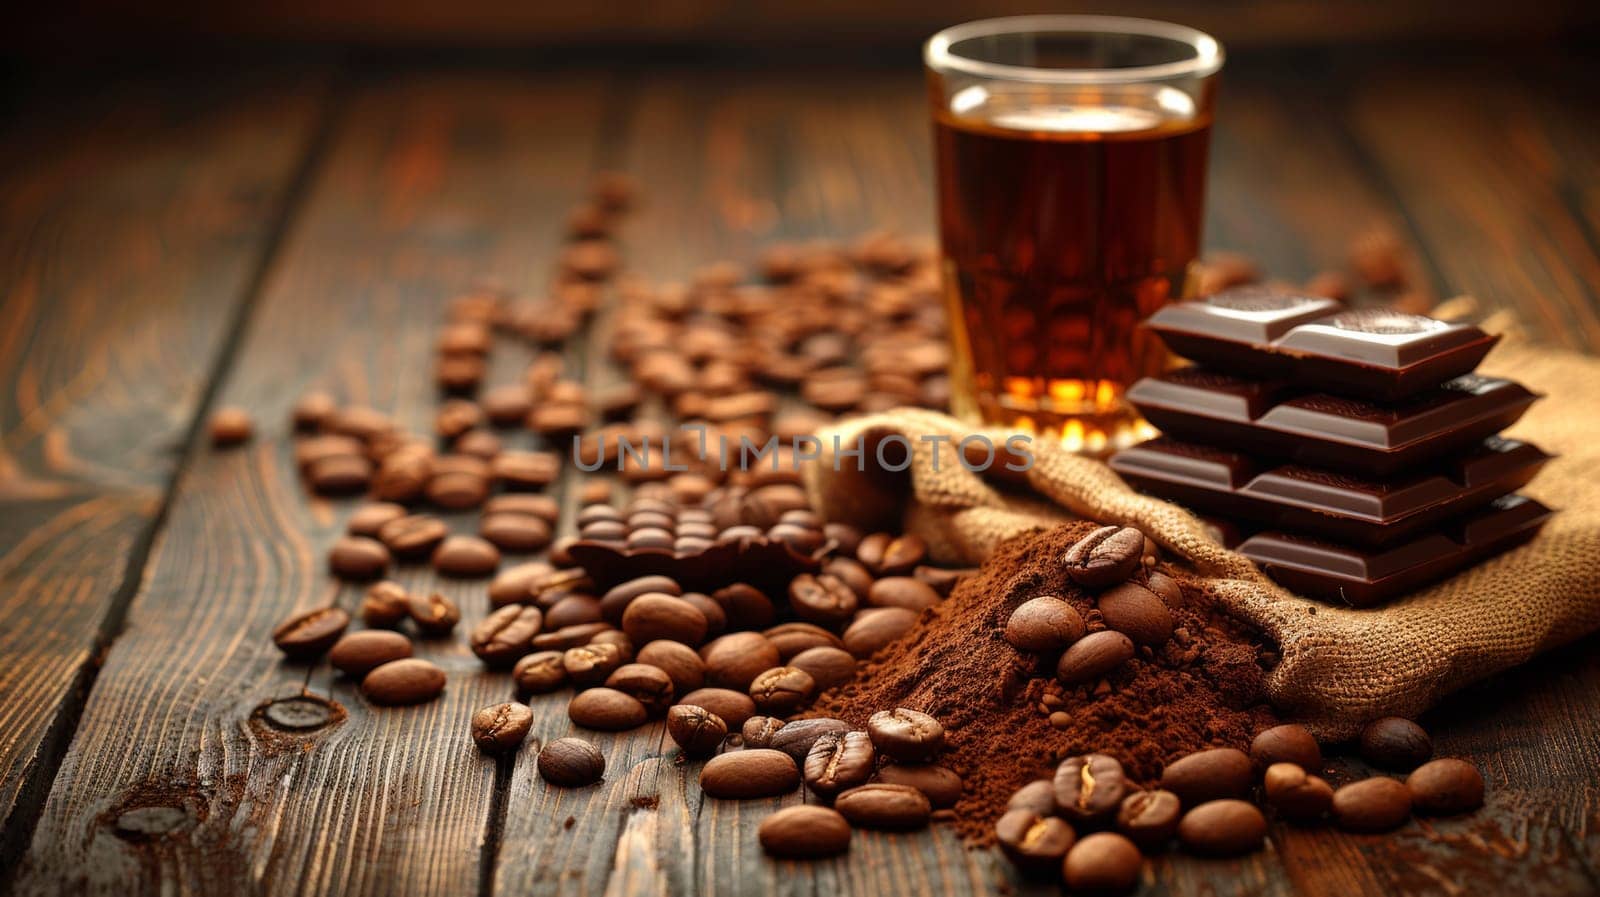 A glass of coffee and chocolate on a table with beans, AI by starush